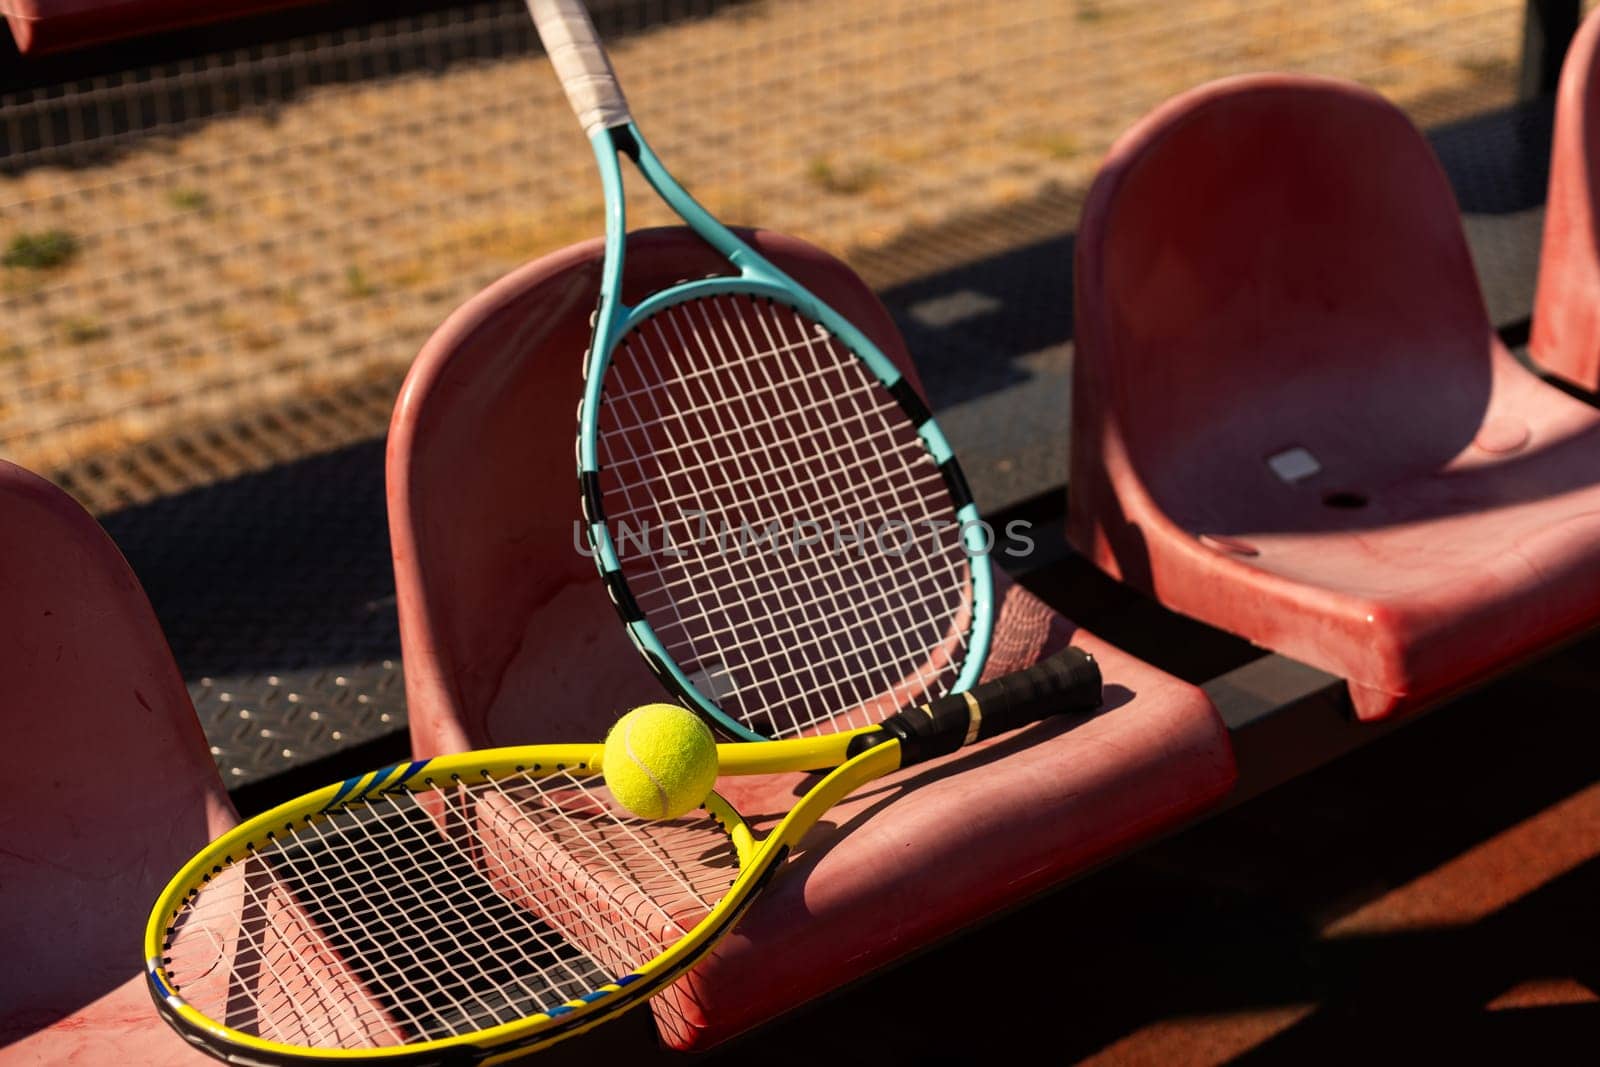 Close up view of tennis racket and balls on the clay tennis court by Andelov13